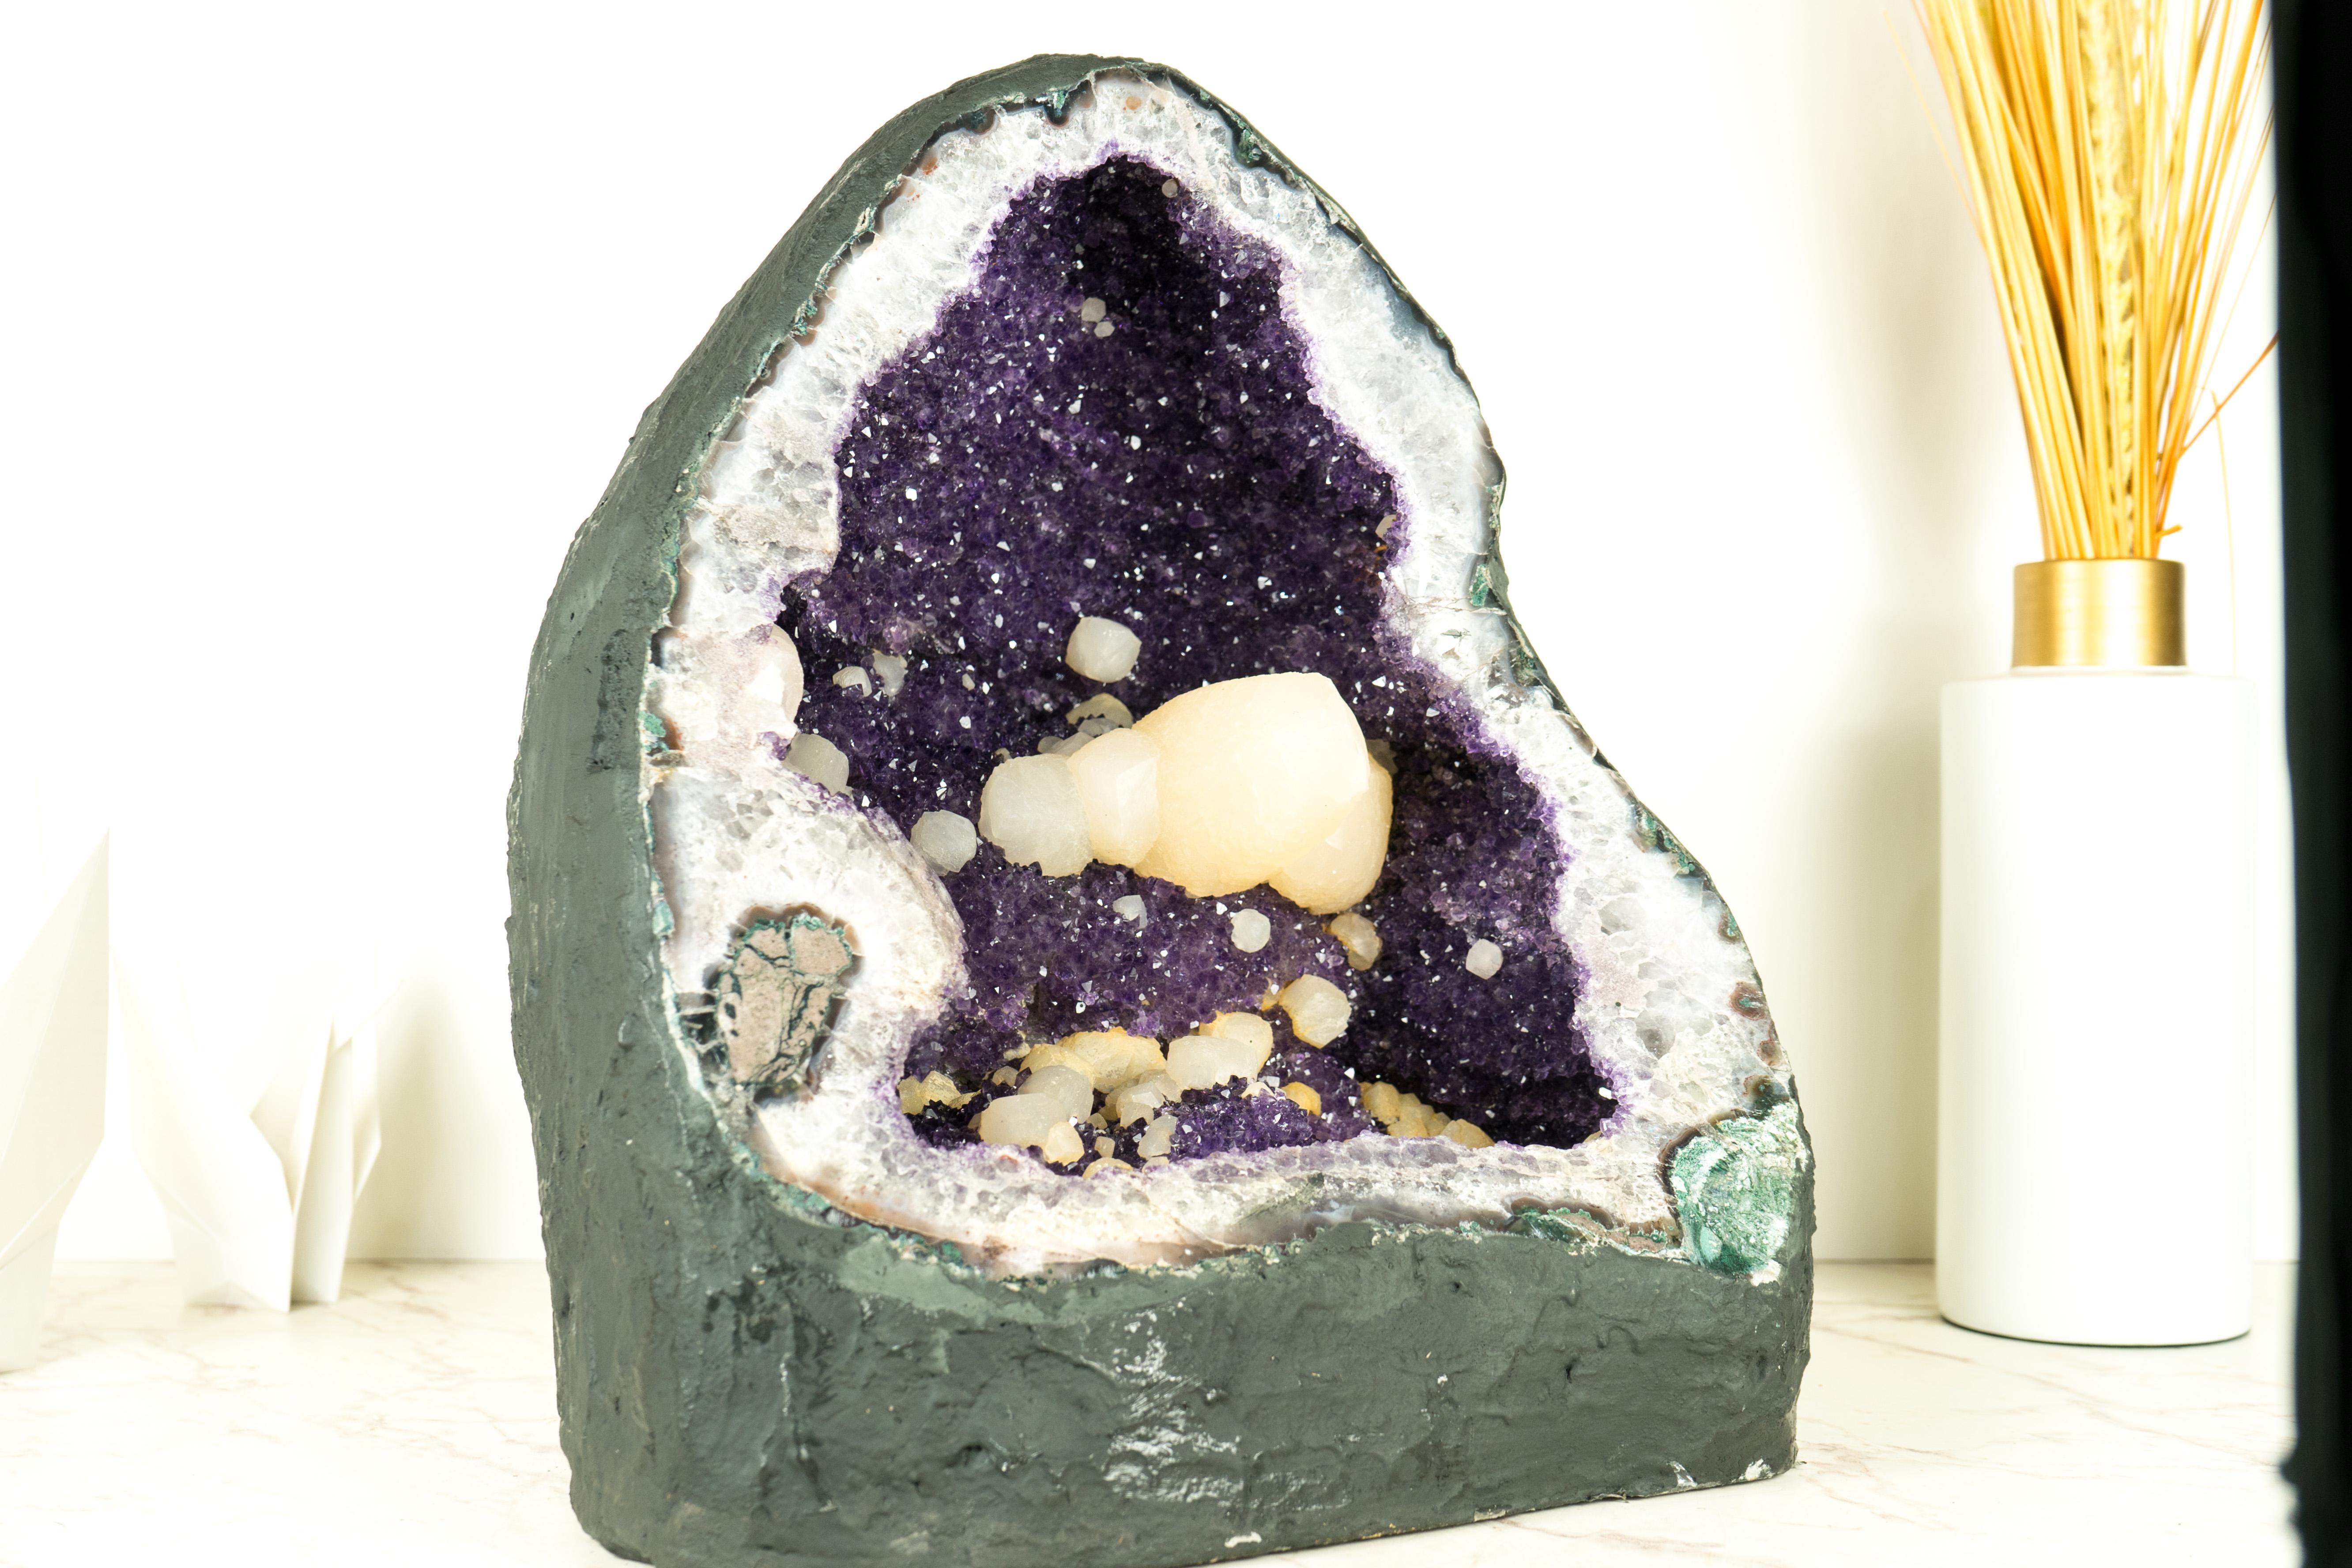 A Uruguayan Amethyst Geode Masterpiece: A Rarely Seen Fusion of Perfect Calcite with Sparkly Purple Amethyst Druzy

▫️ Description

Renowned worldwide for their exceptional beauty, Uruguayan geodes rank as some of the most exquisite amethyst